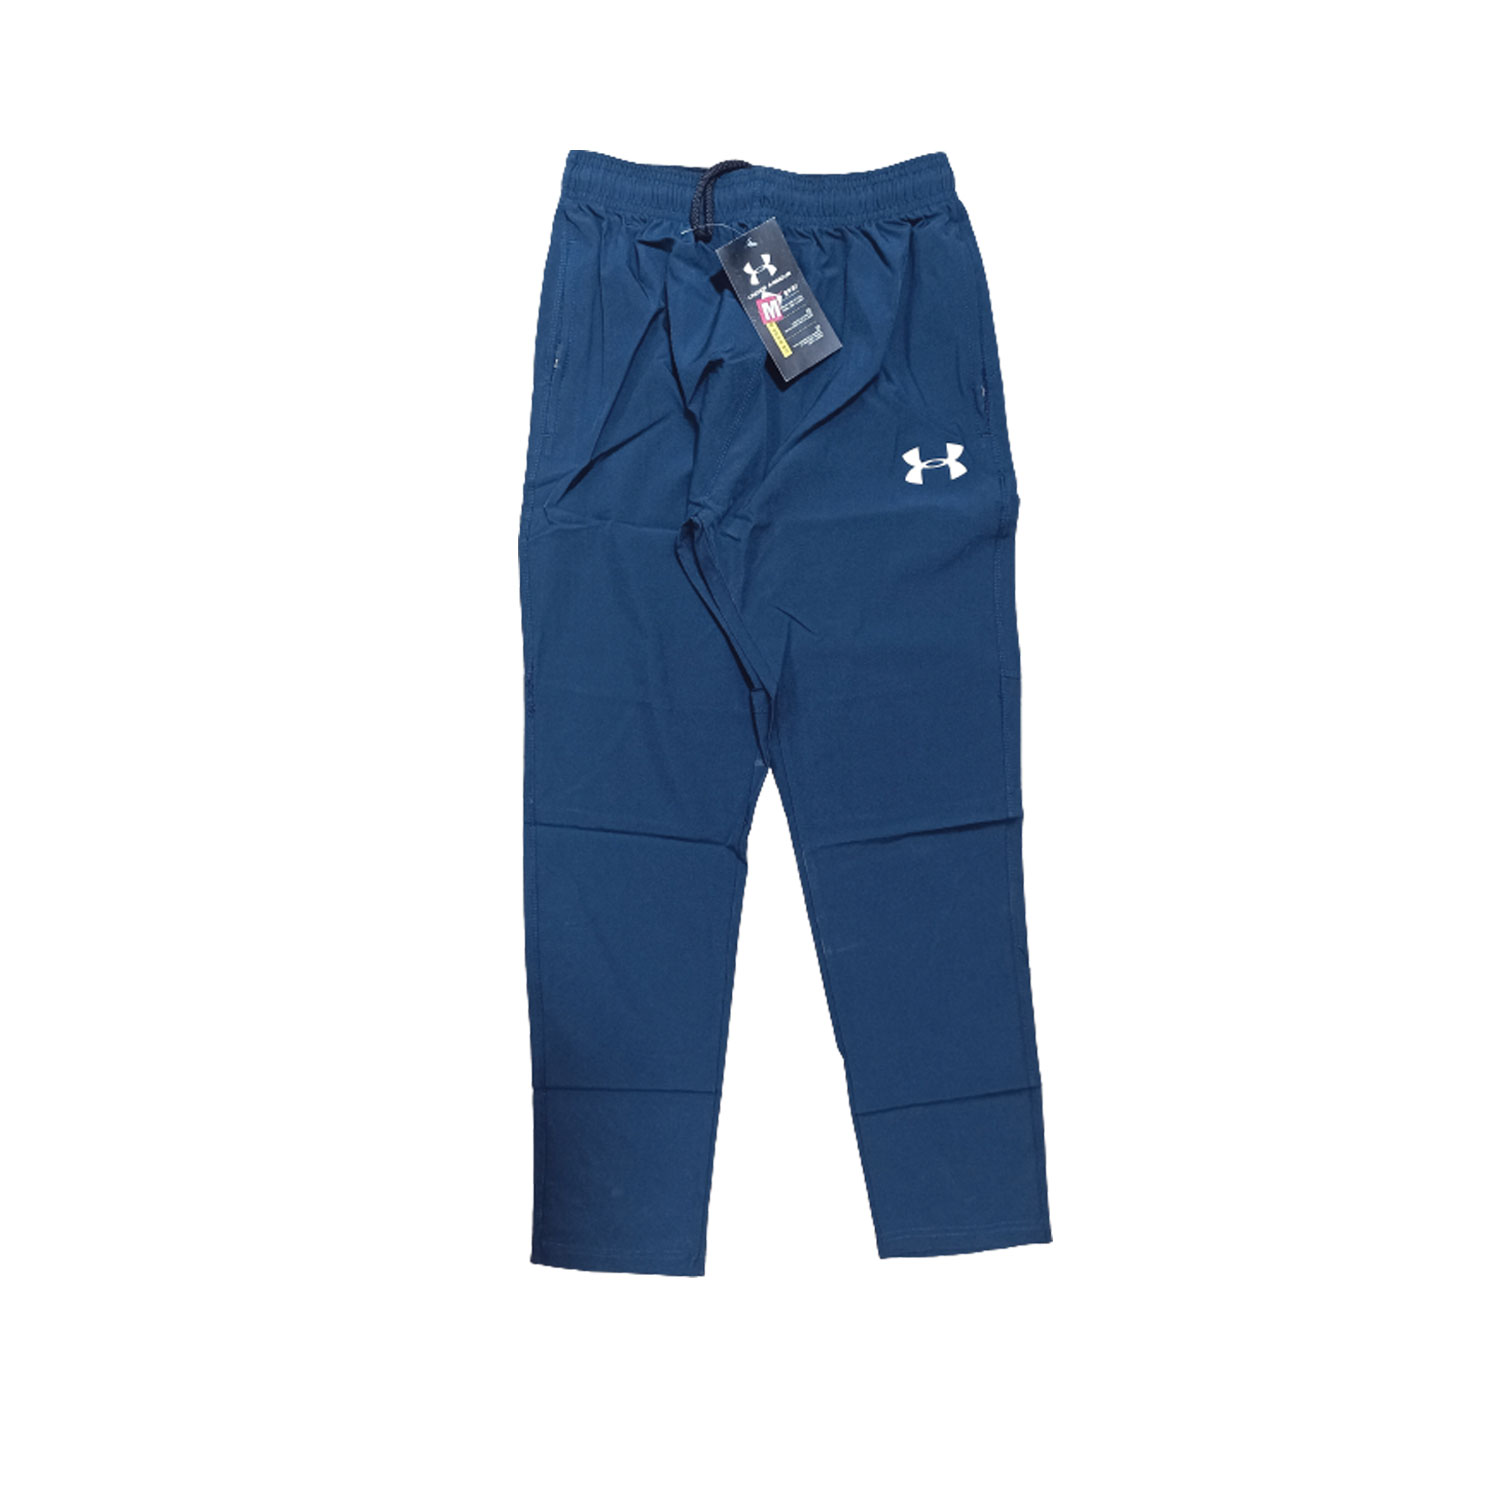 NS Under Armour Lower (4 Pieces in 1 Pkt )